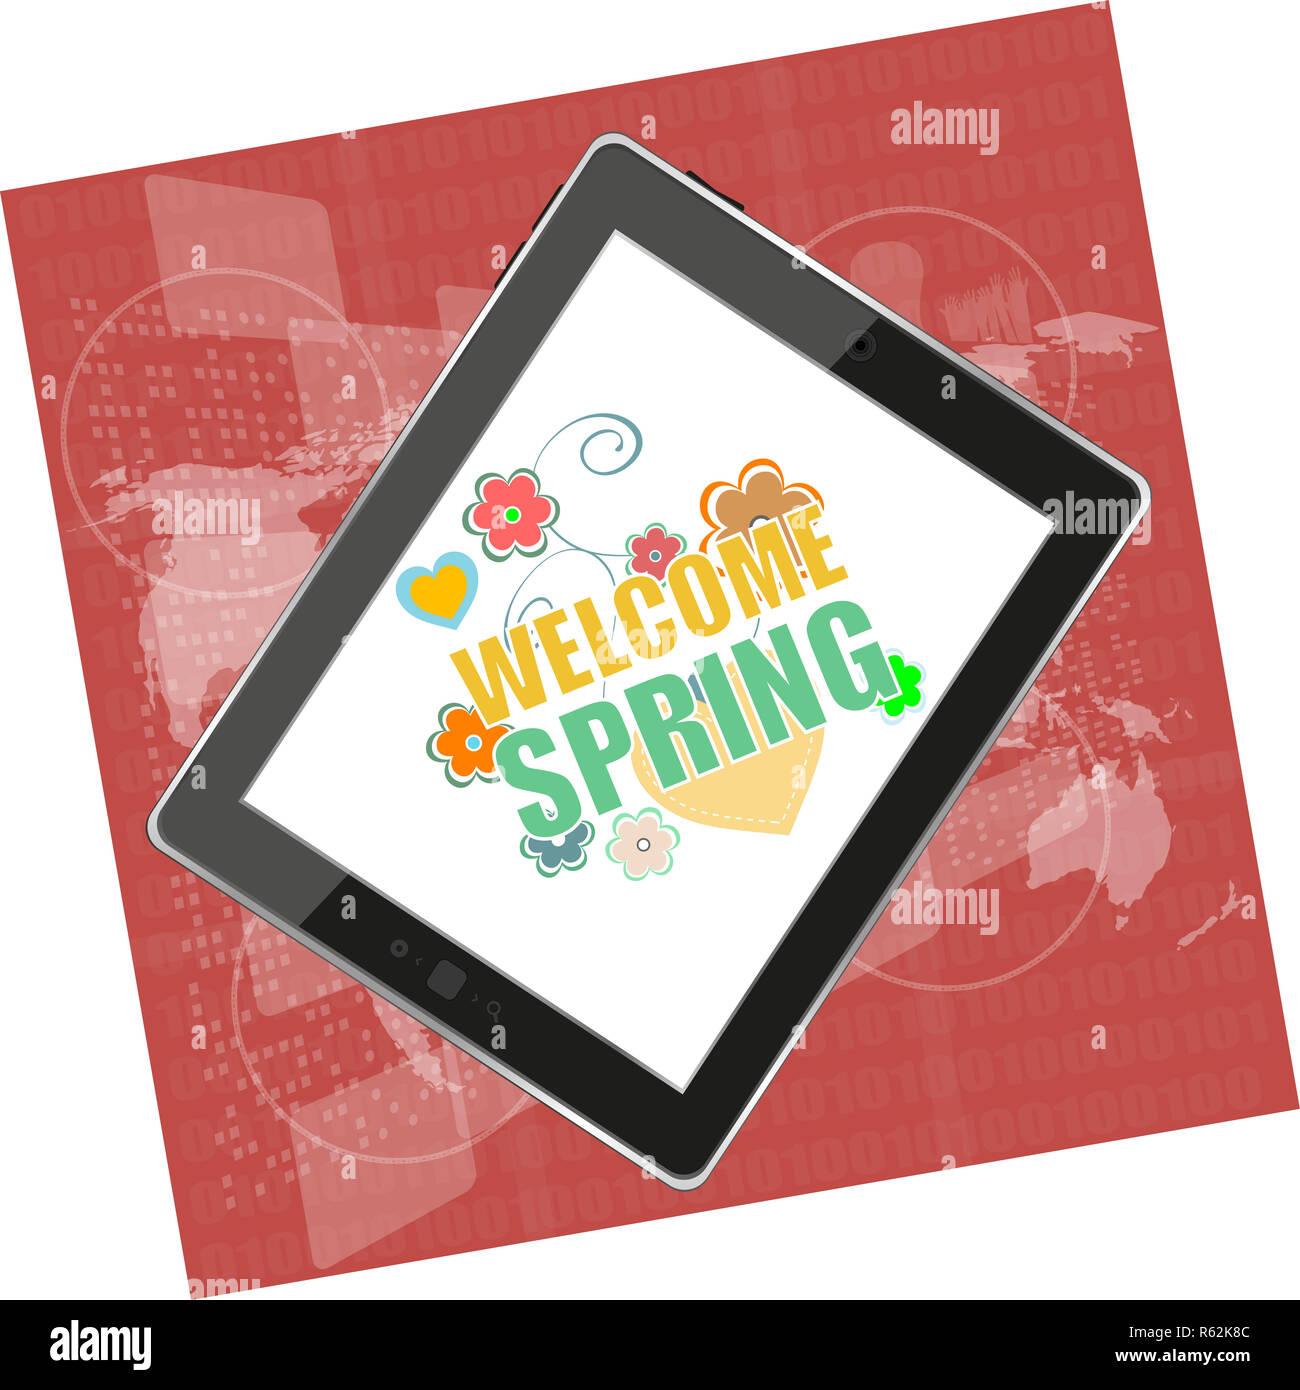 Welcome spring words on holiday card Stock Photo